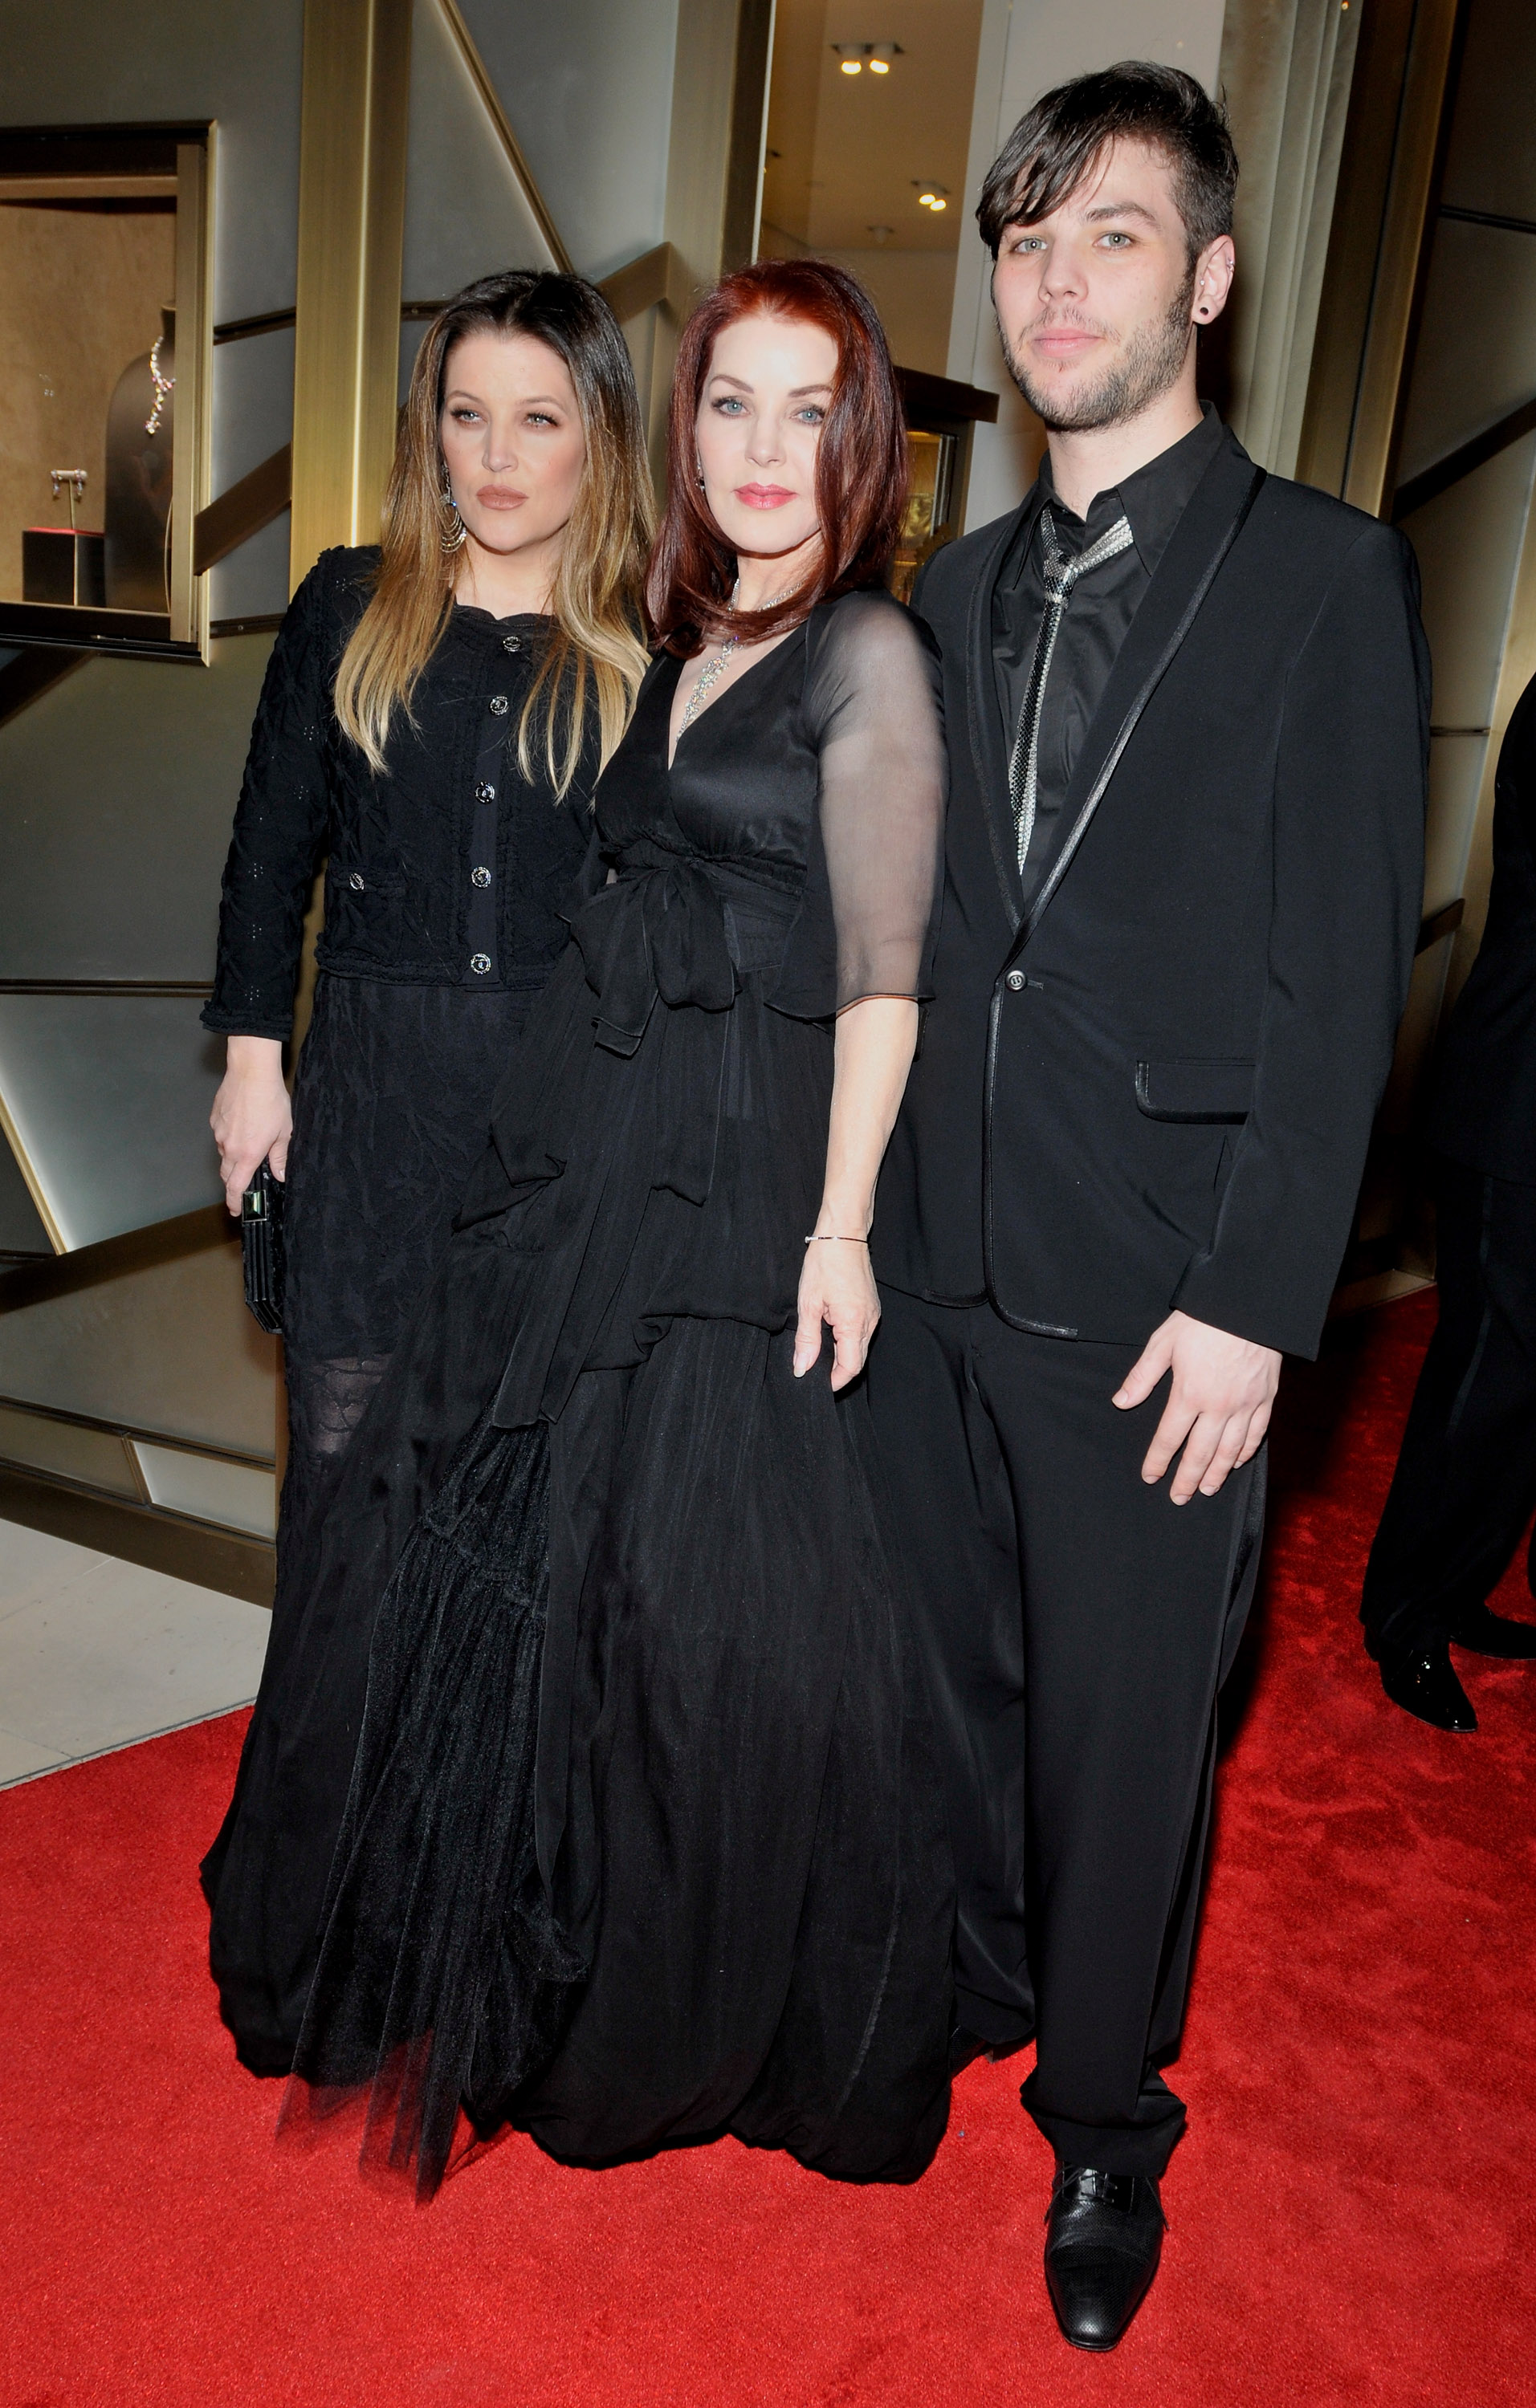 (L-R) Lisa Marie Presley, Priscilla Presley and Navarone Garibaldi Garcia attend at a cocktail reception at CityCenter on January 29, 2011 in Las Vegas, Nevada.| Source: Getty Images